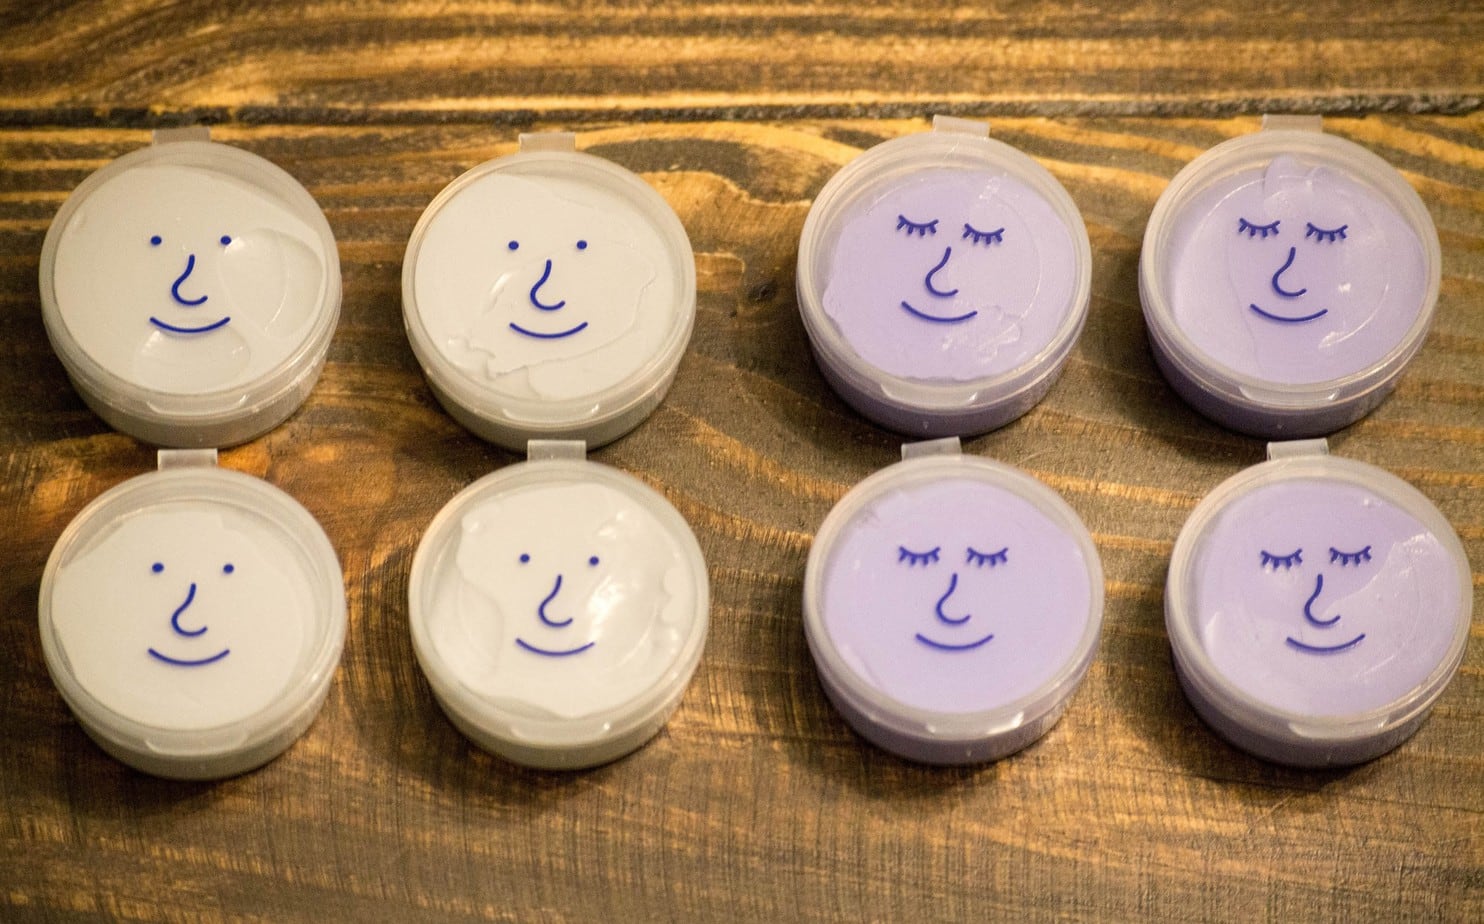 Eight impression putty containers